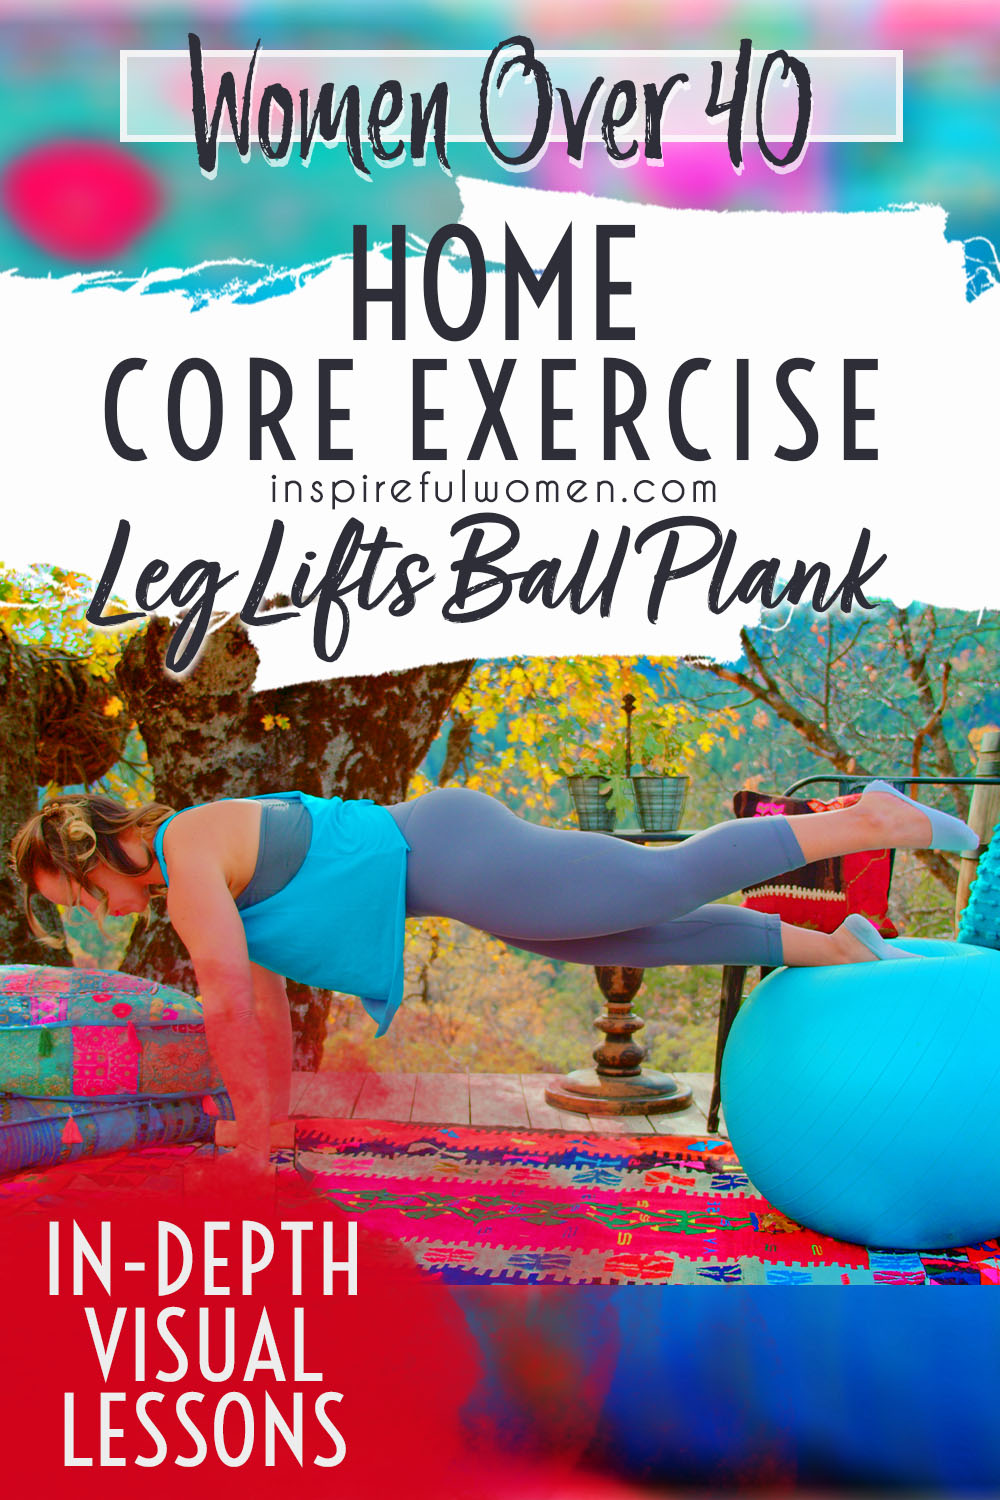 leg-lifts-stability-ball-plank-neutral-spine-bodyweight-core-abs-exercise-women-above-40